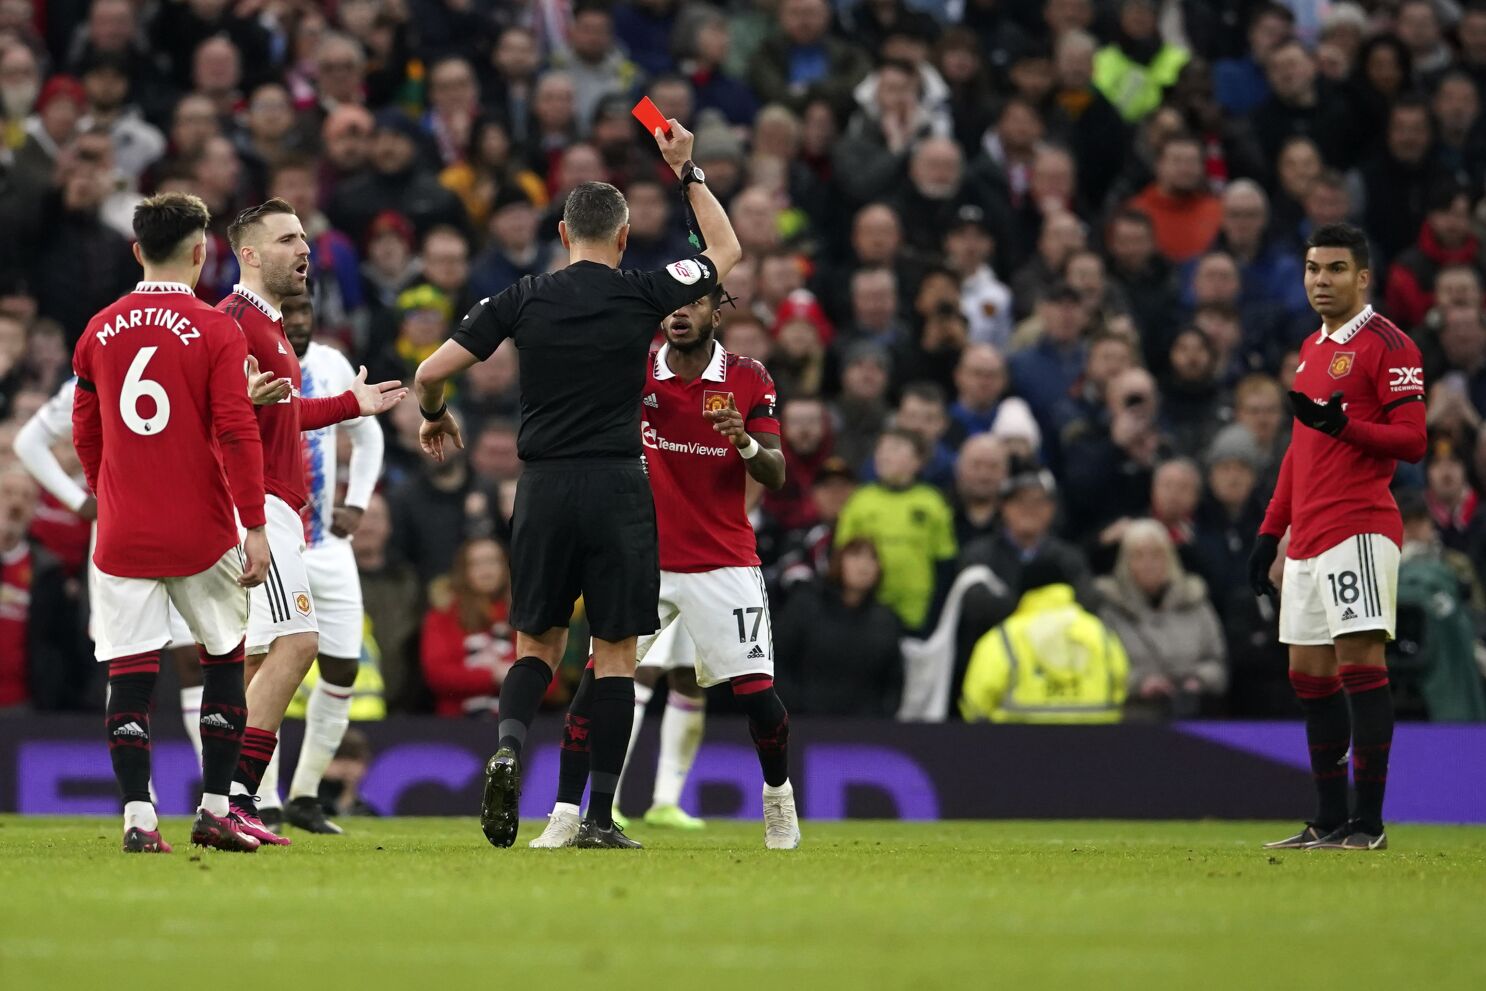 Man United Palace 2-1, Casemiro suspended after red - The San Diego Union-Tribune